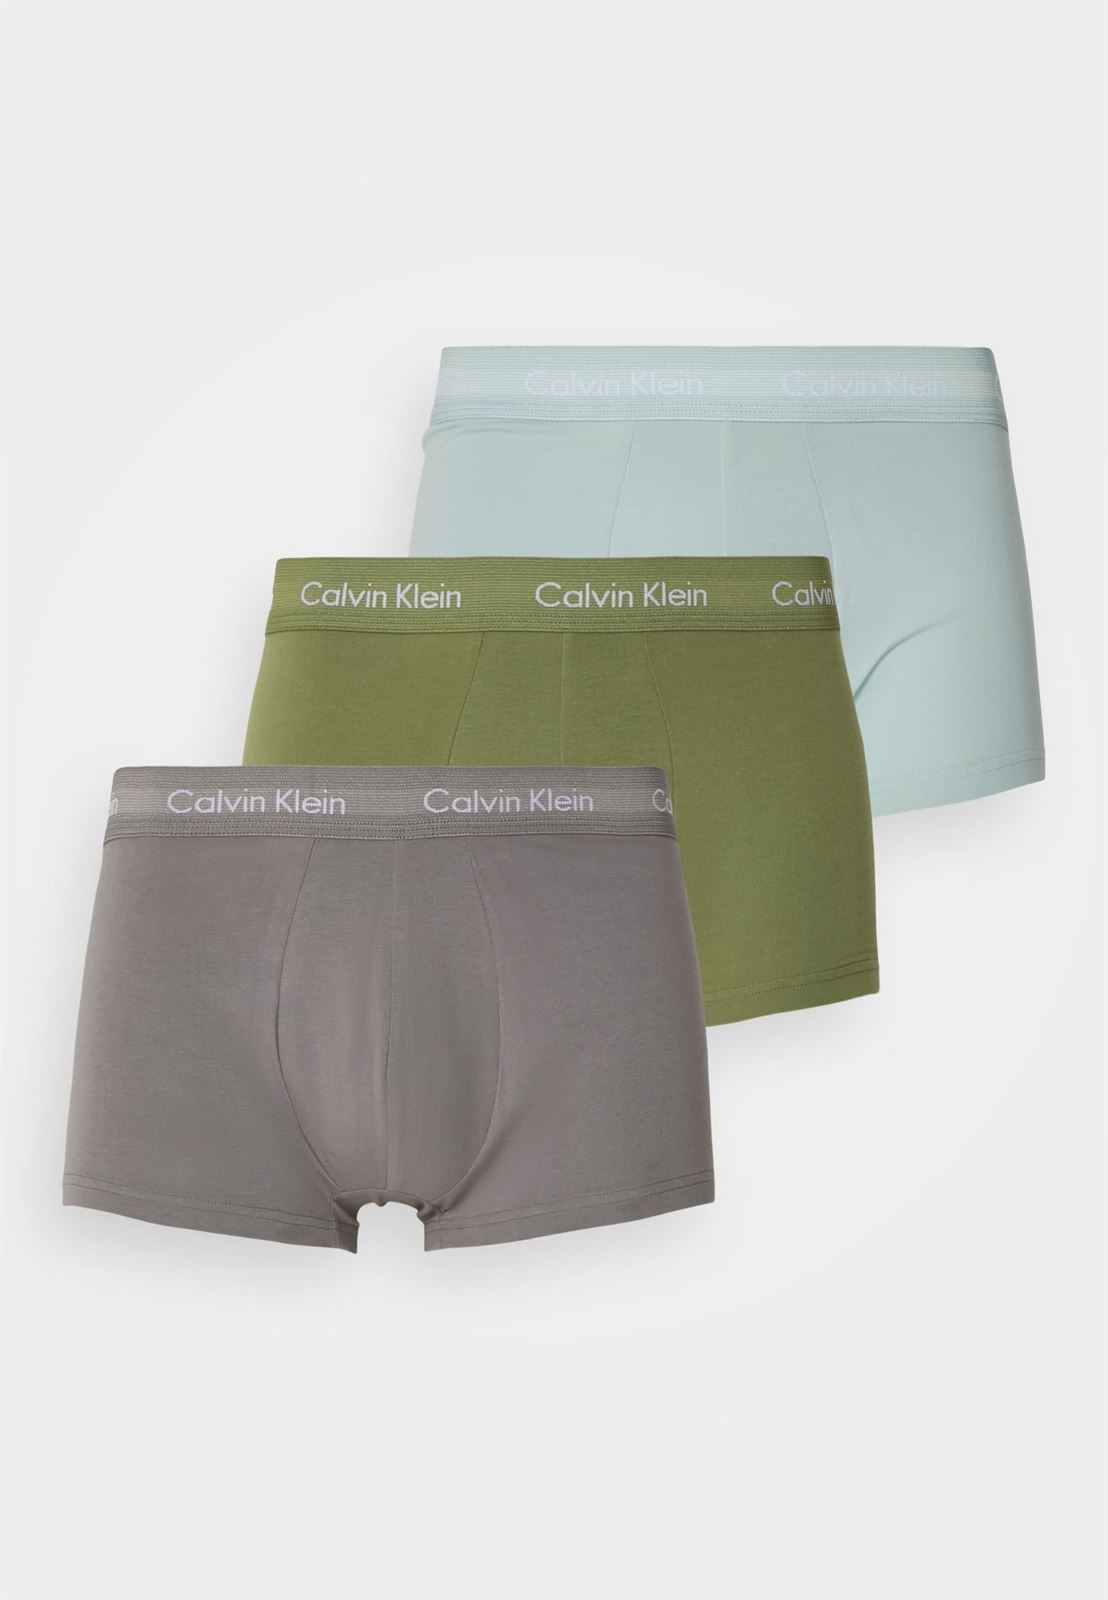 Pack 3 boxer Calvin Klein 0000U2664G H5M olv branch, charcoal gry, gry mist - Imagen 1